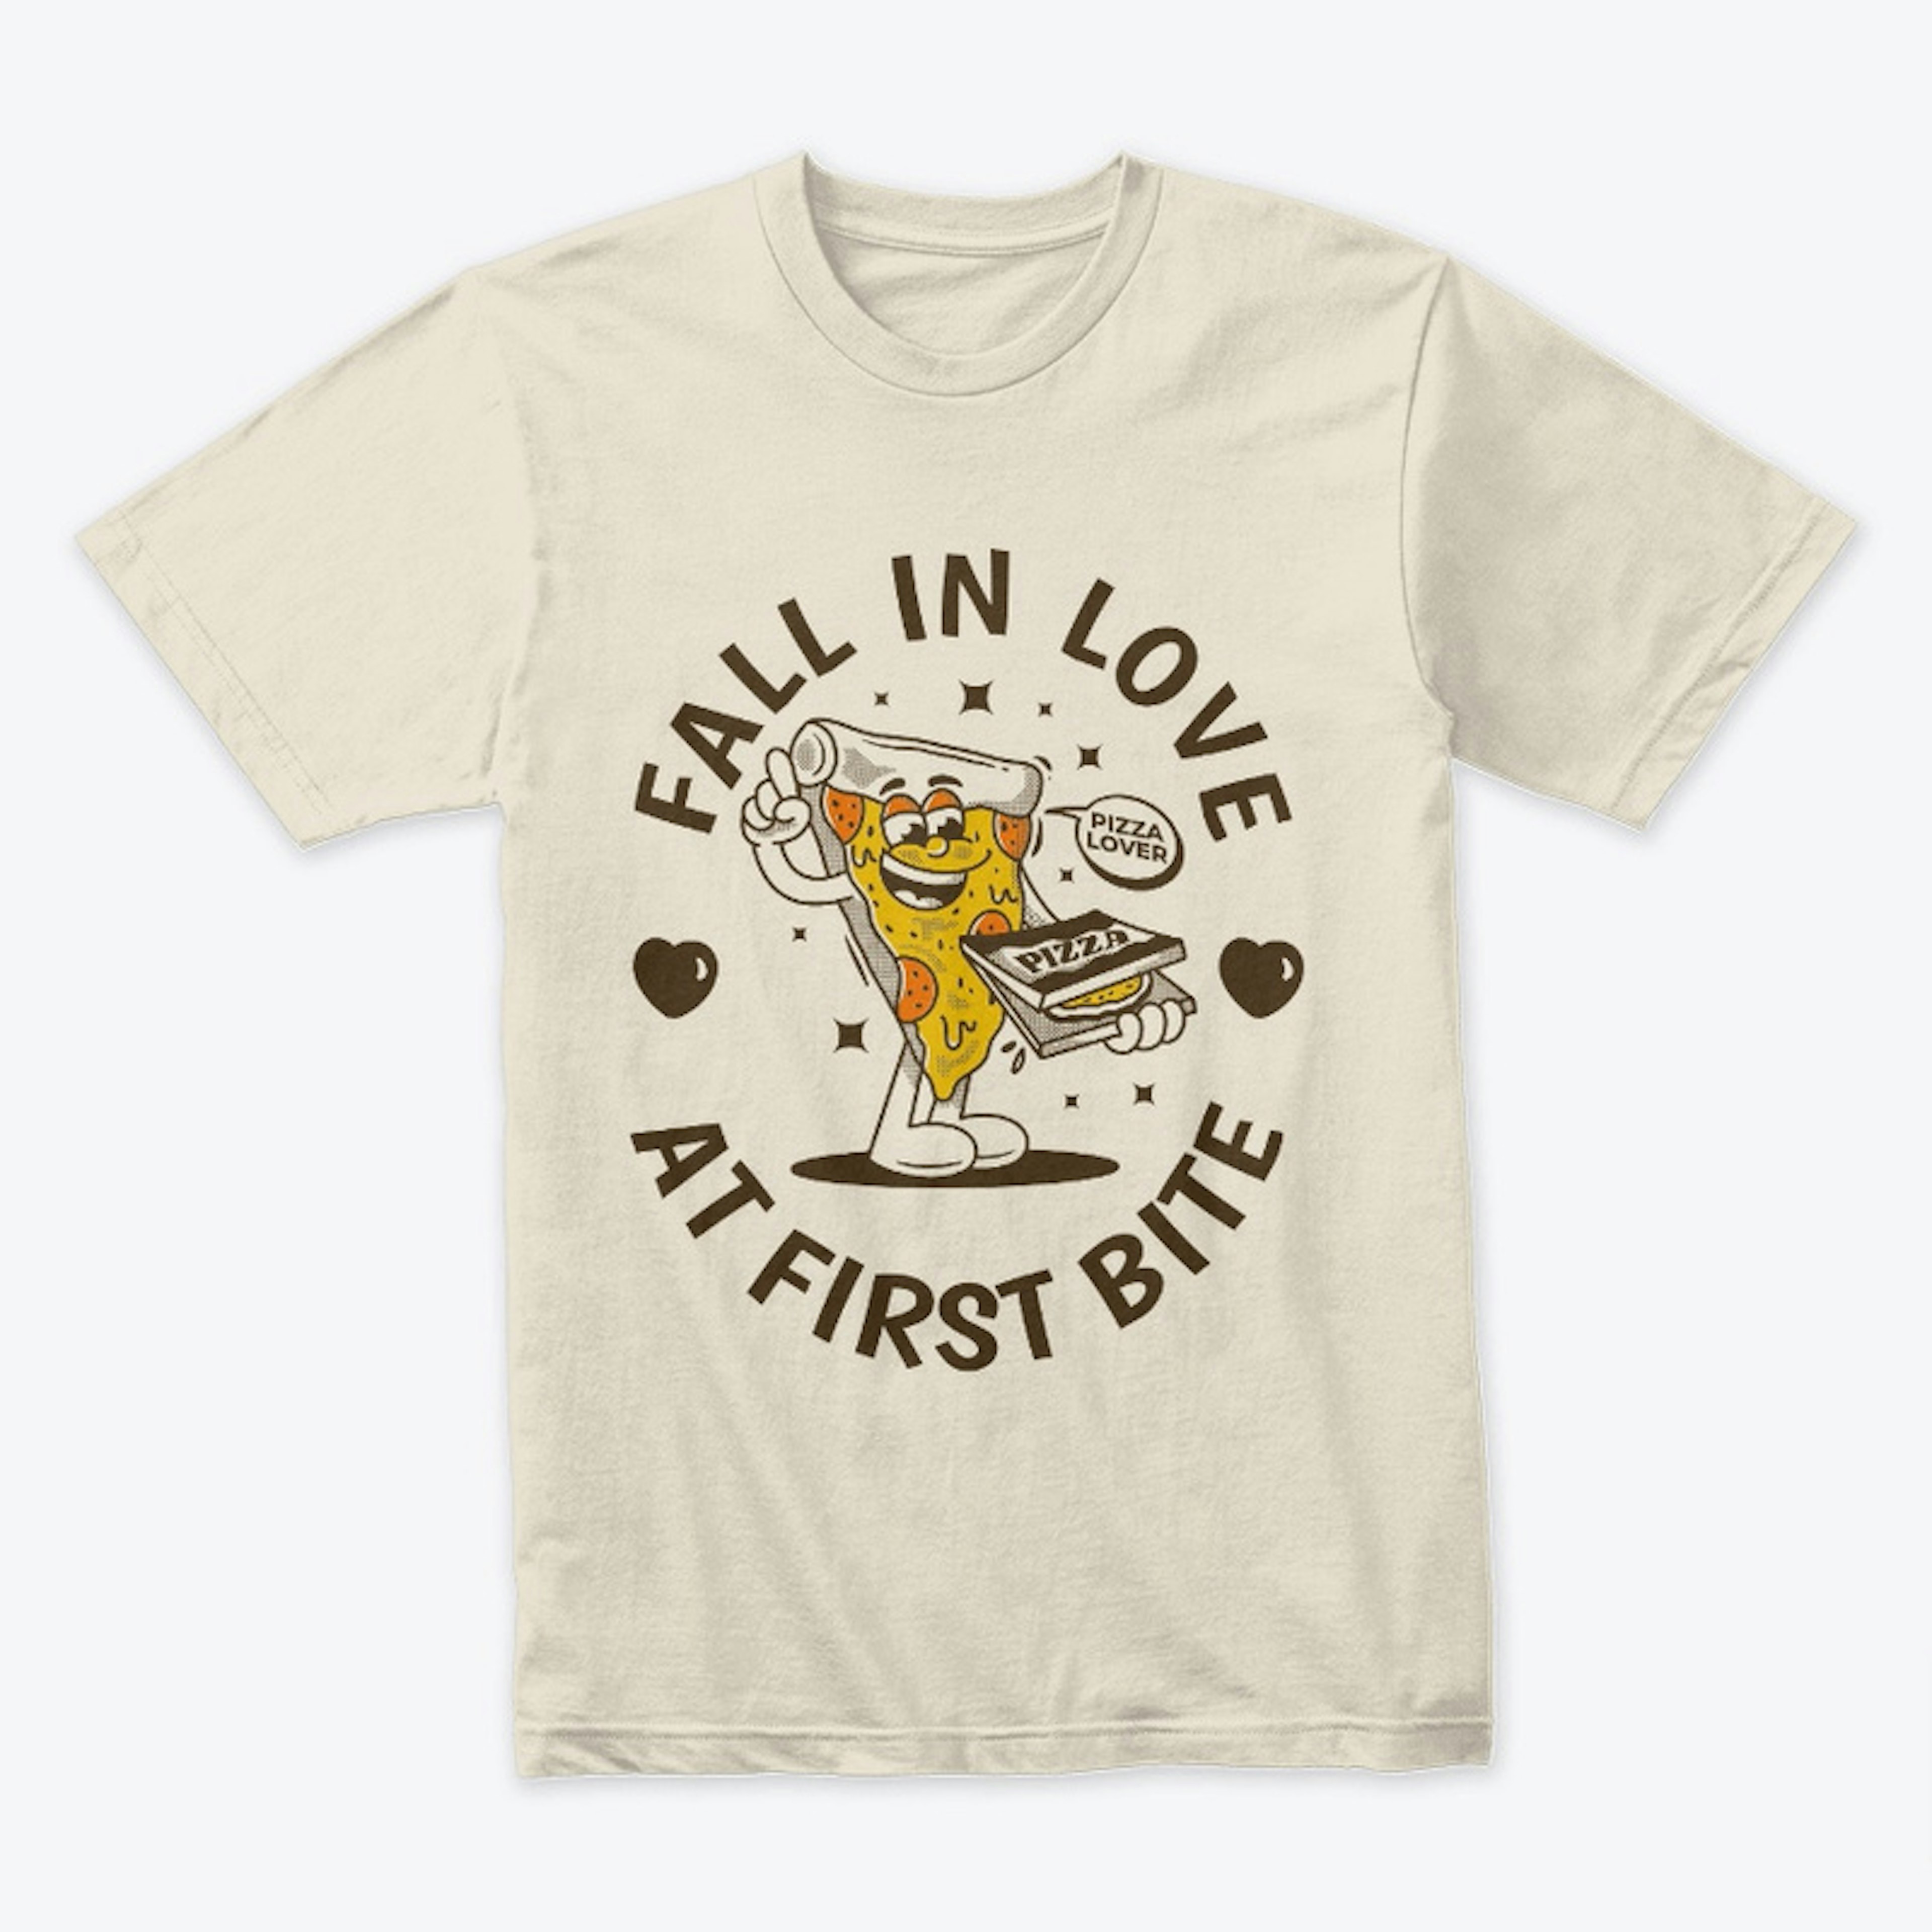 Fall in love at first bite